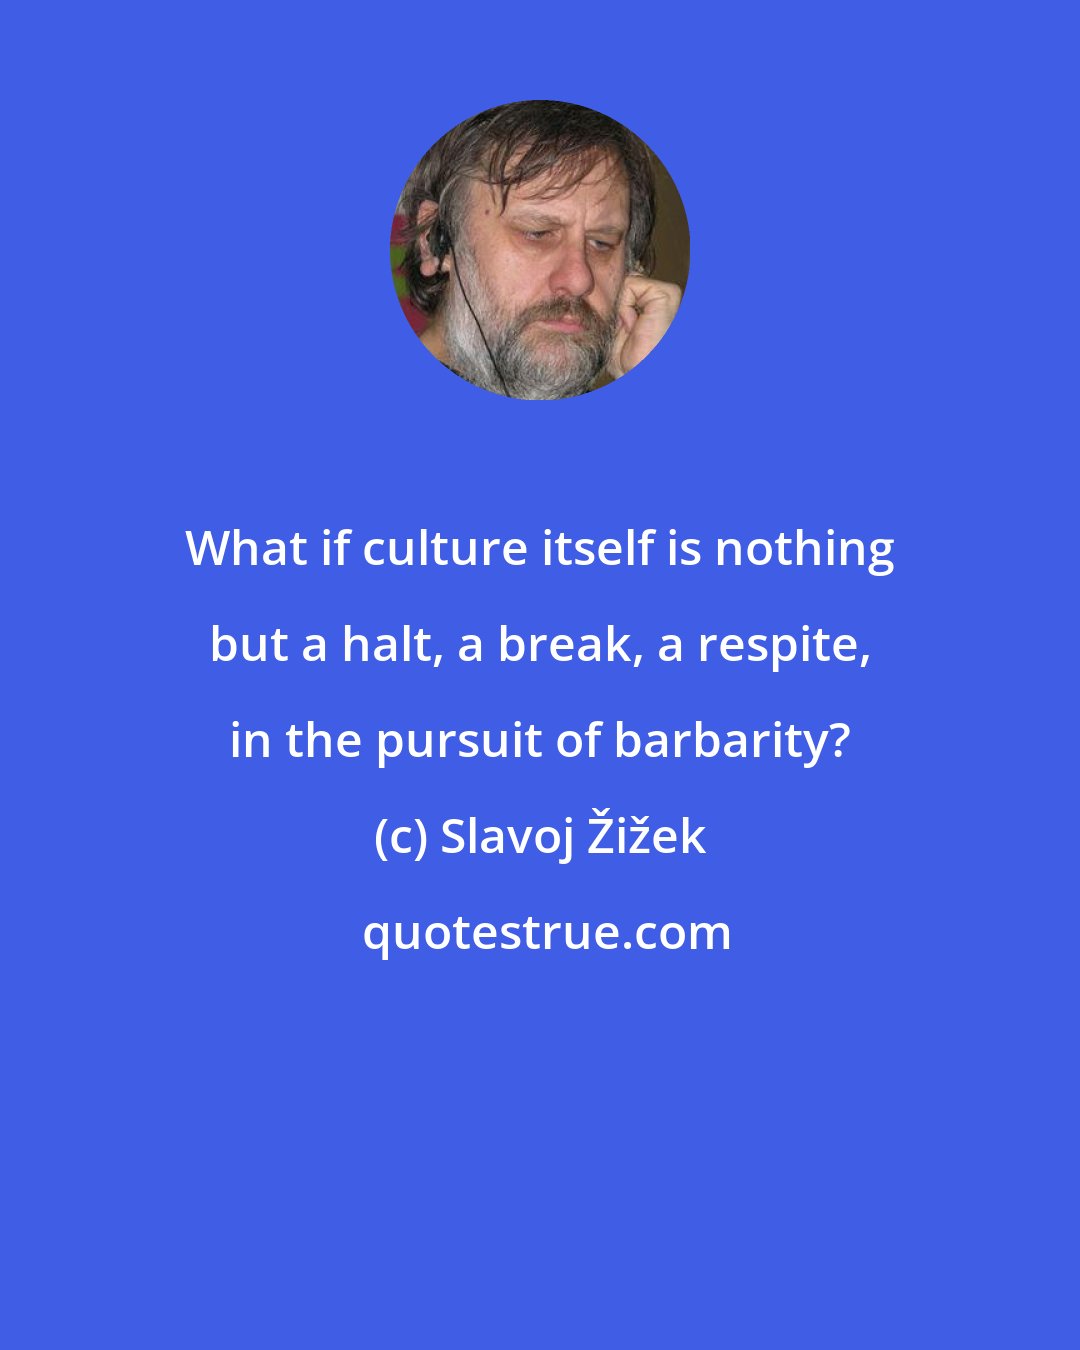 Slavoj Žižek: What if culture itself is nothing but a halt, a break, a respite, in the pursuit of barbarity?